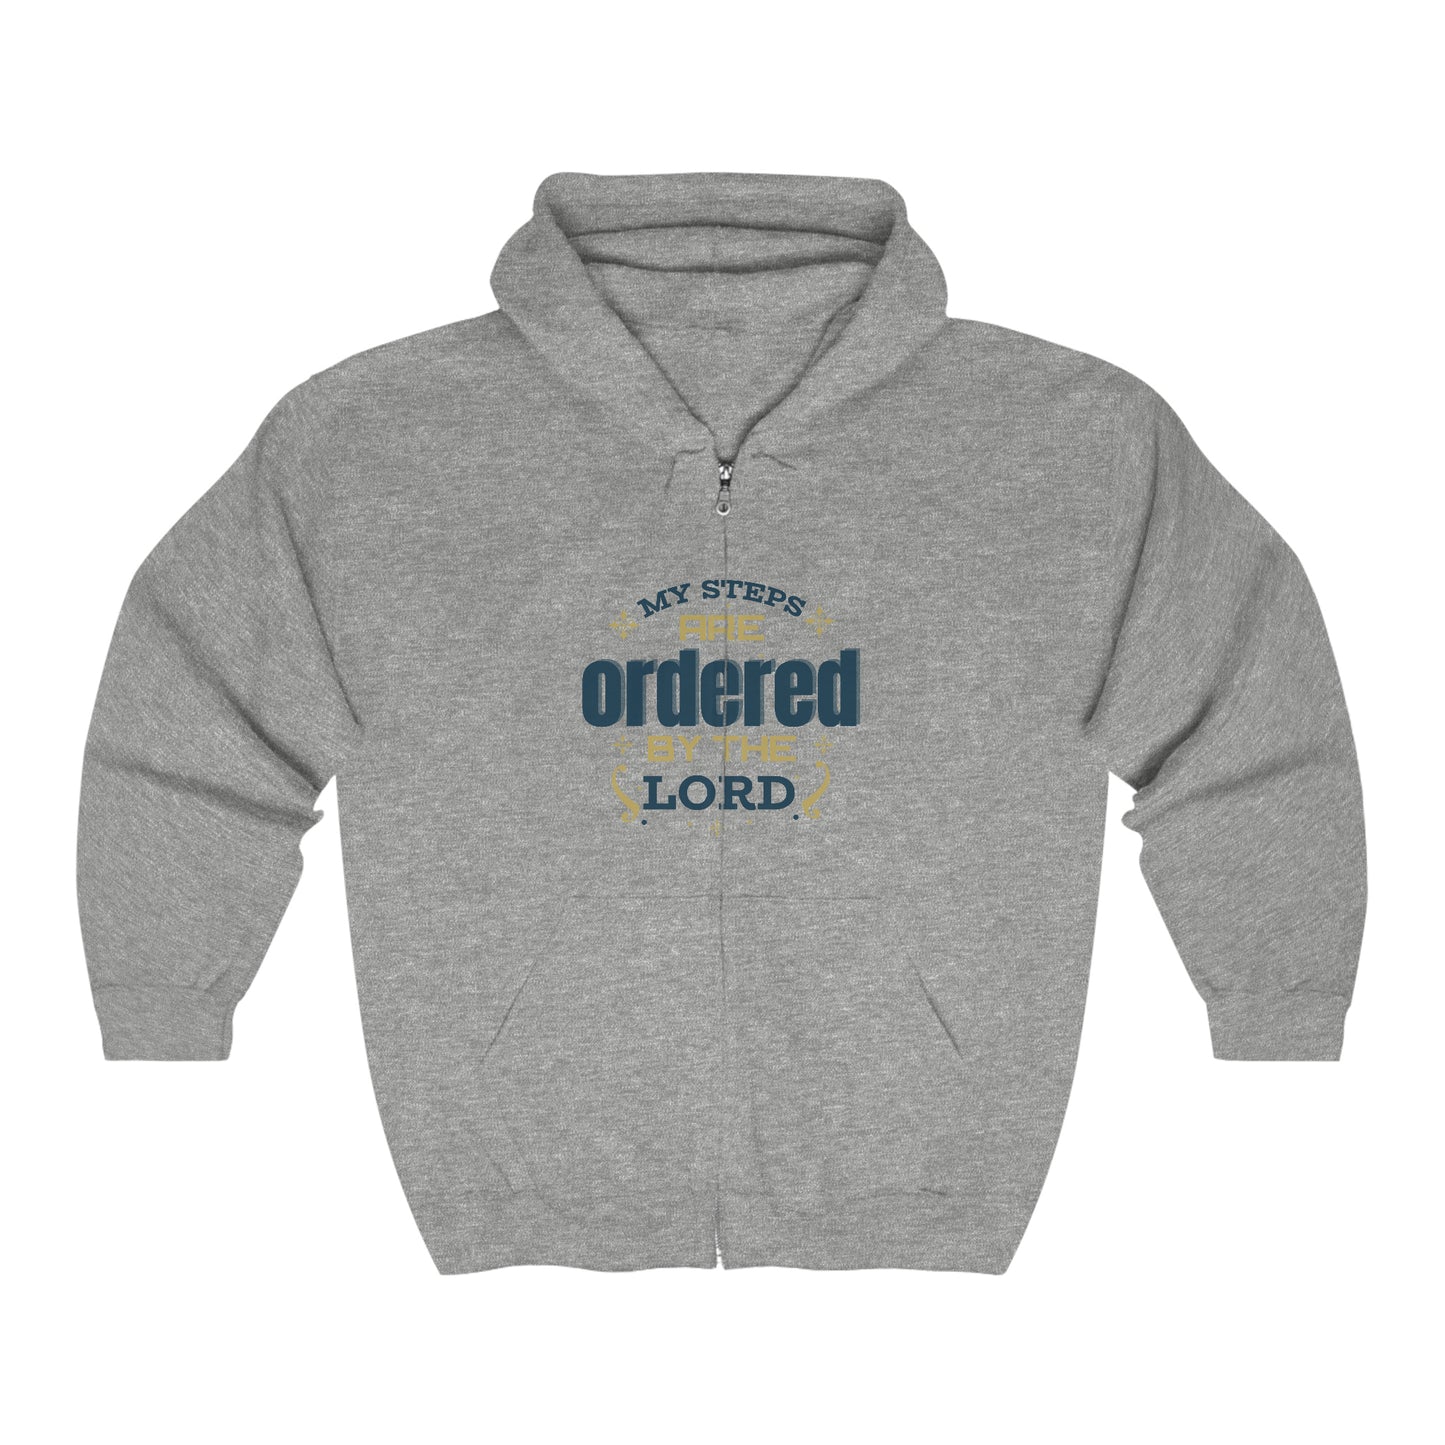 My Steps Are Ordered By The Lord Unisex Heavy Blend Full Zip Hooded Sweatshirt